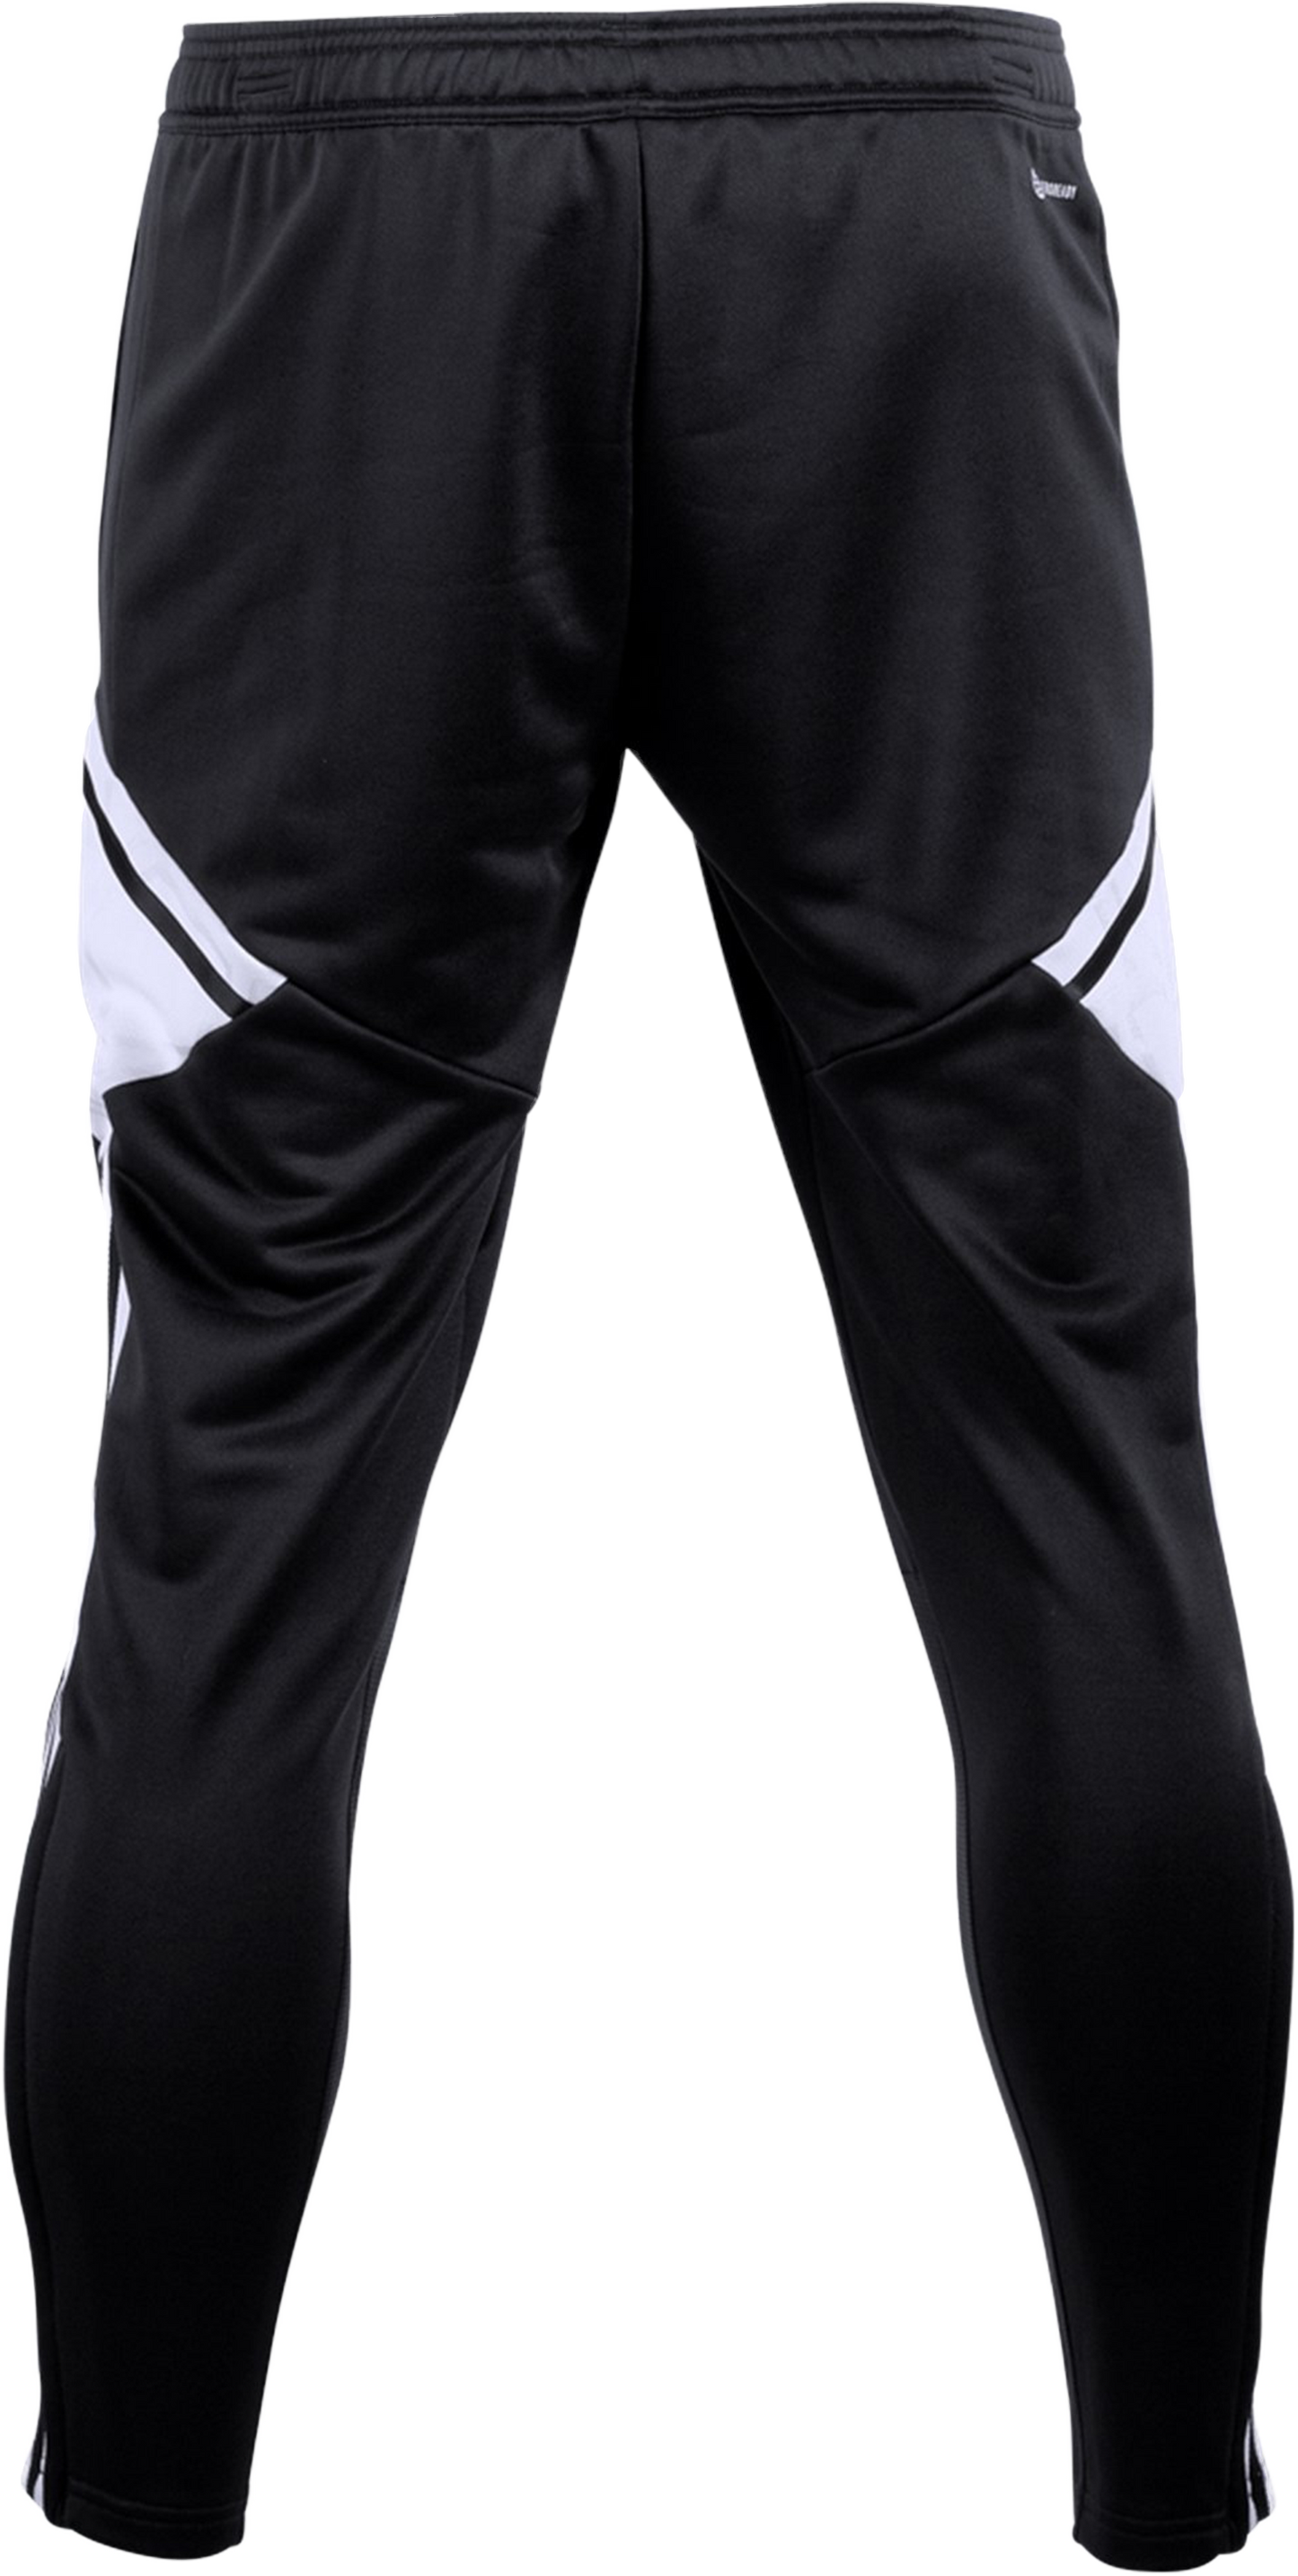 Lincoln Youth Soccer Pant [Women's]